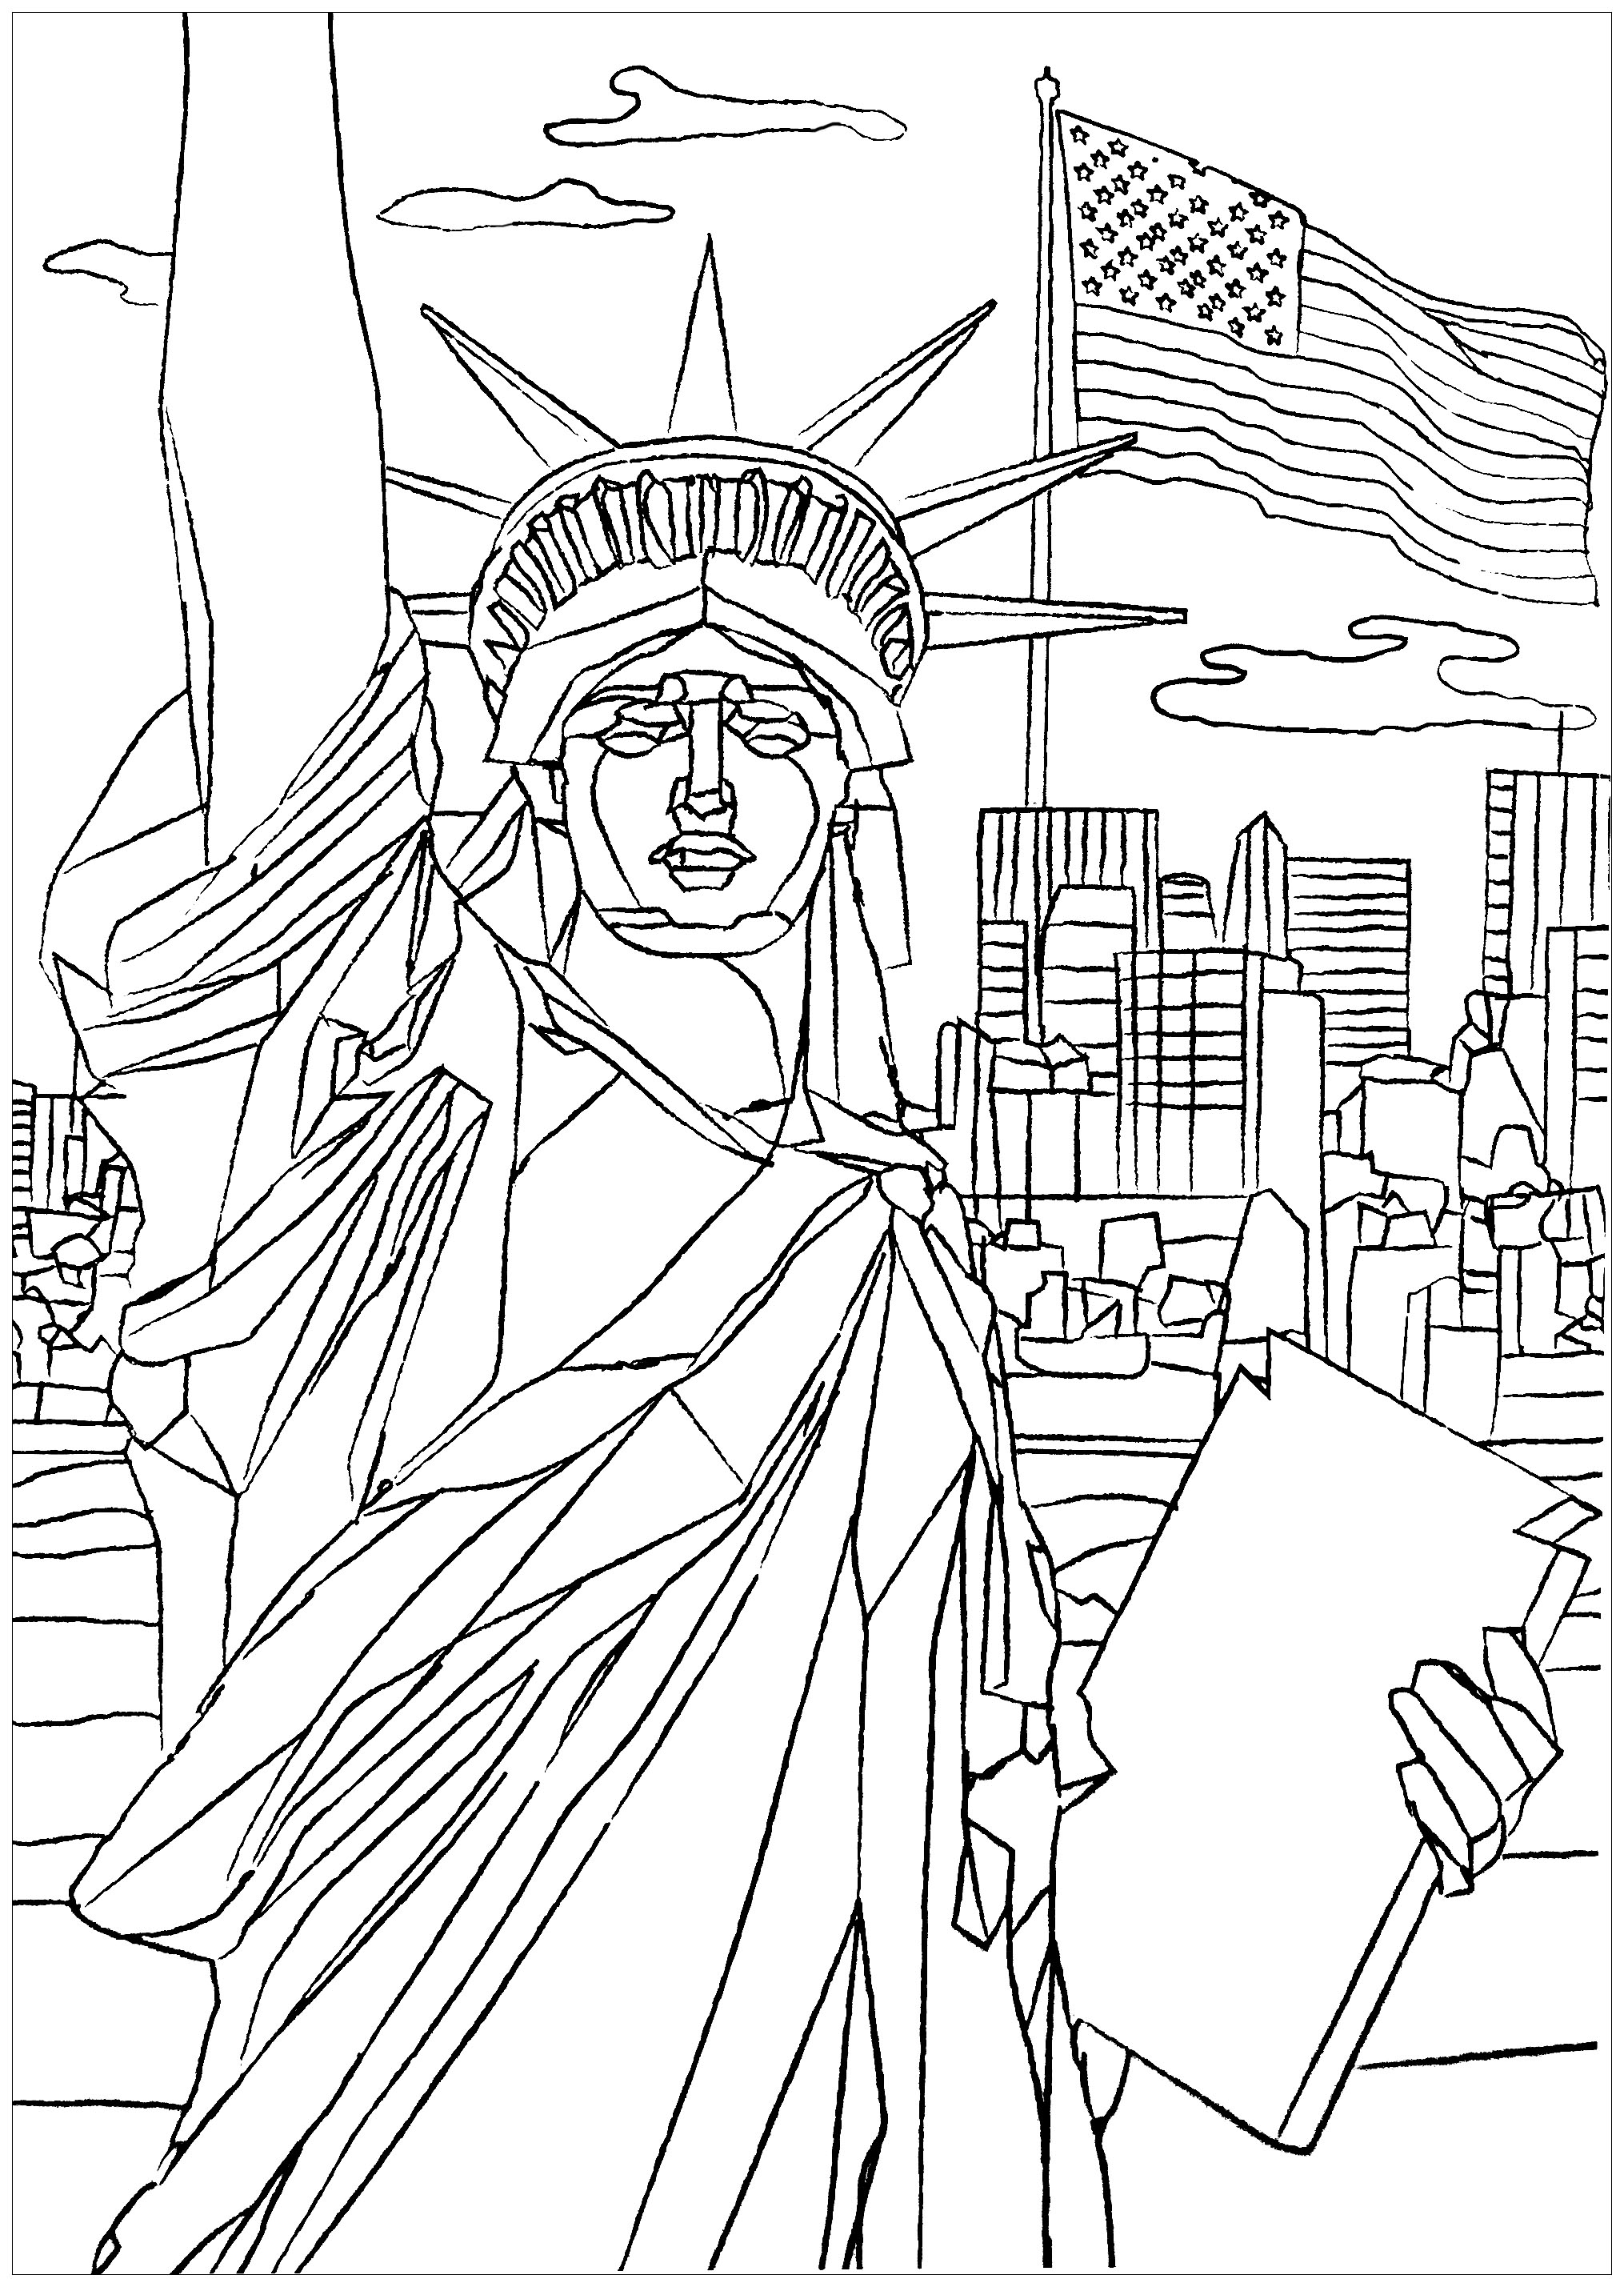 Statue of Liberty, in New York - New York Adult Coloring Pages